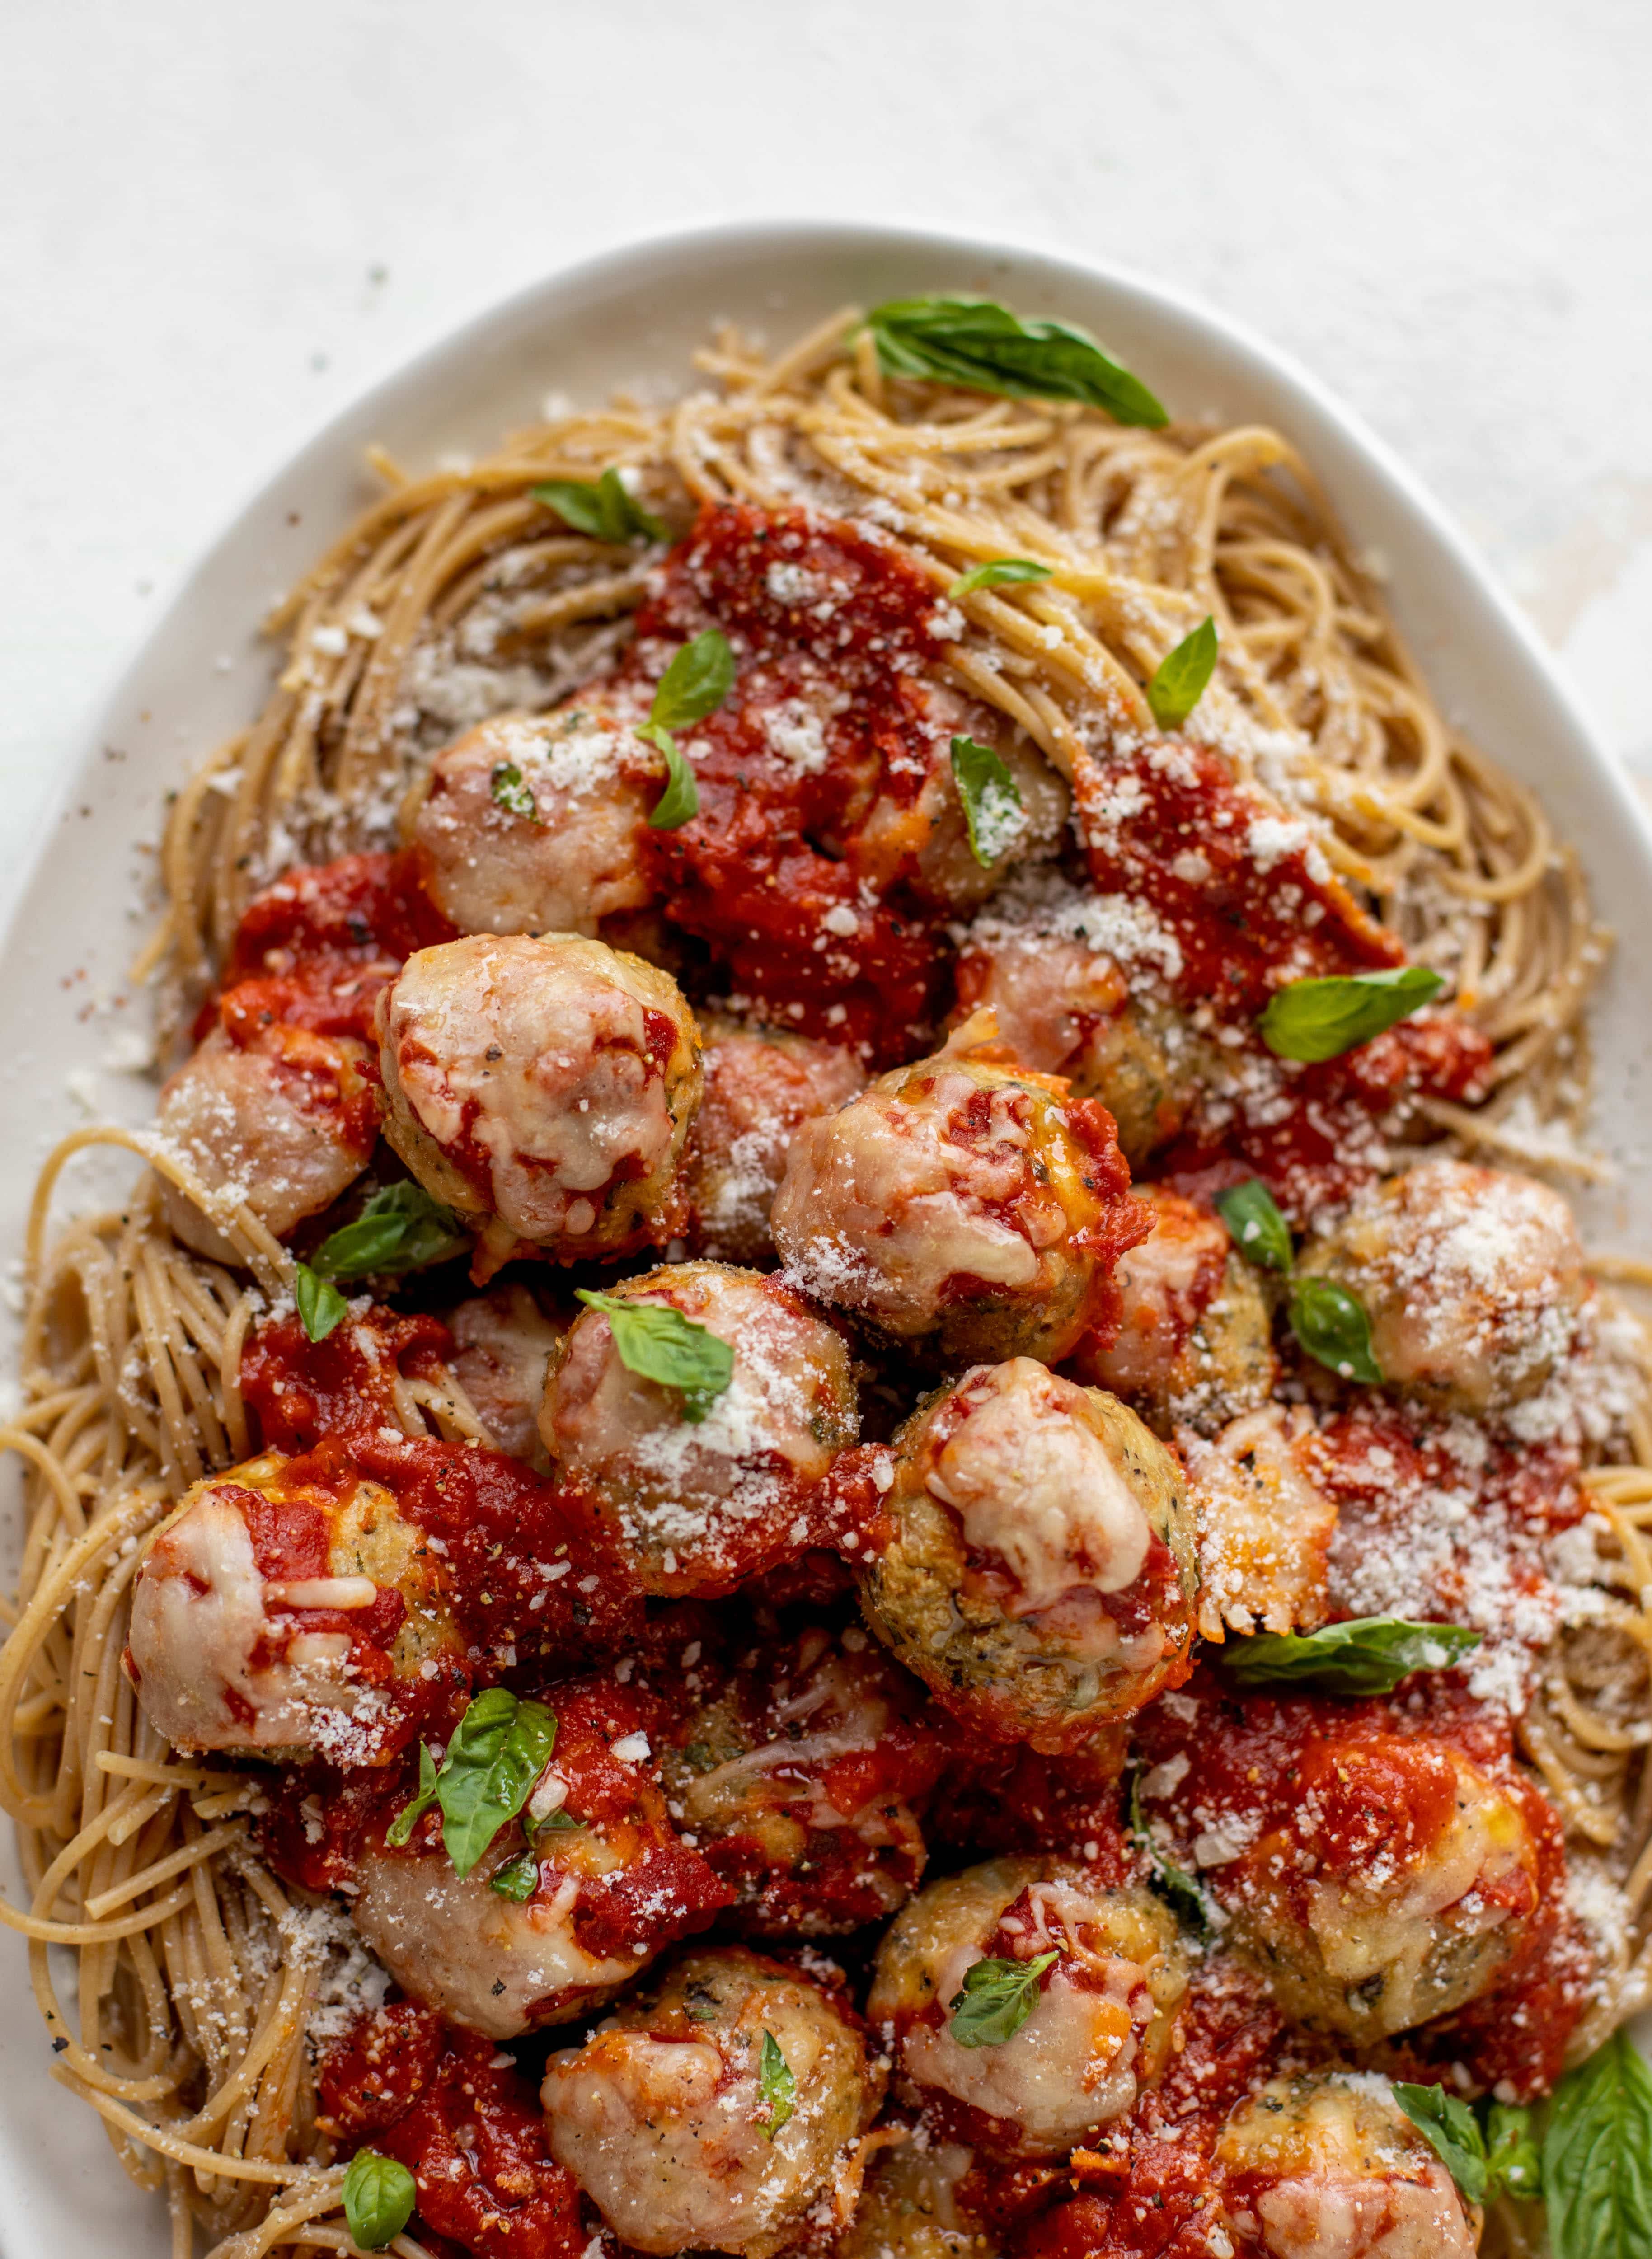 Chicken parmesan meatballs are baked and super flavorful! Serve with roasted garlic spaghetti for the best dinner ever! You can make them ahead of time too!